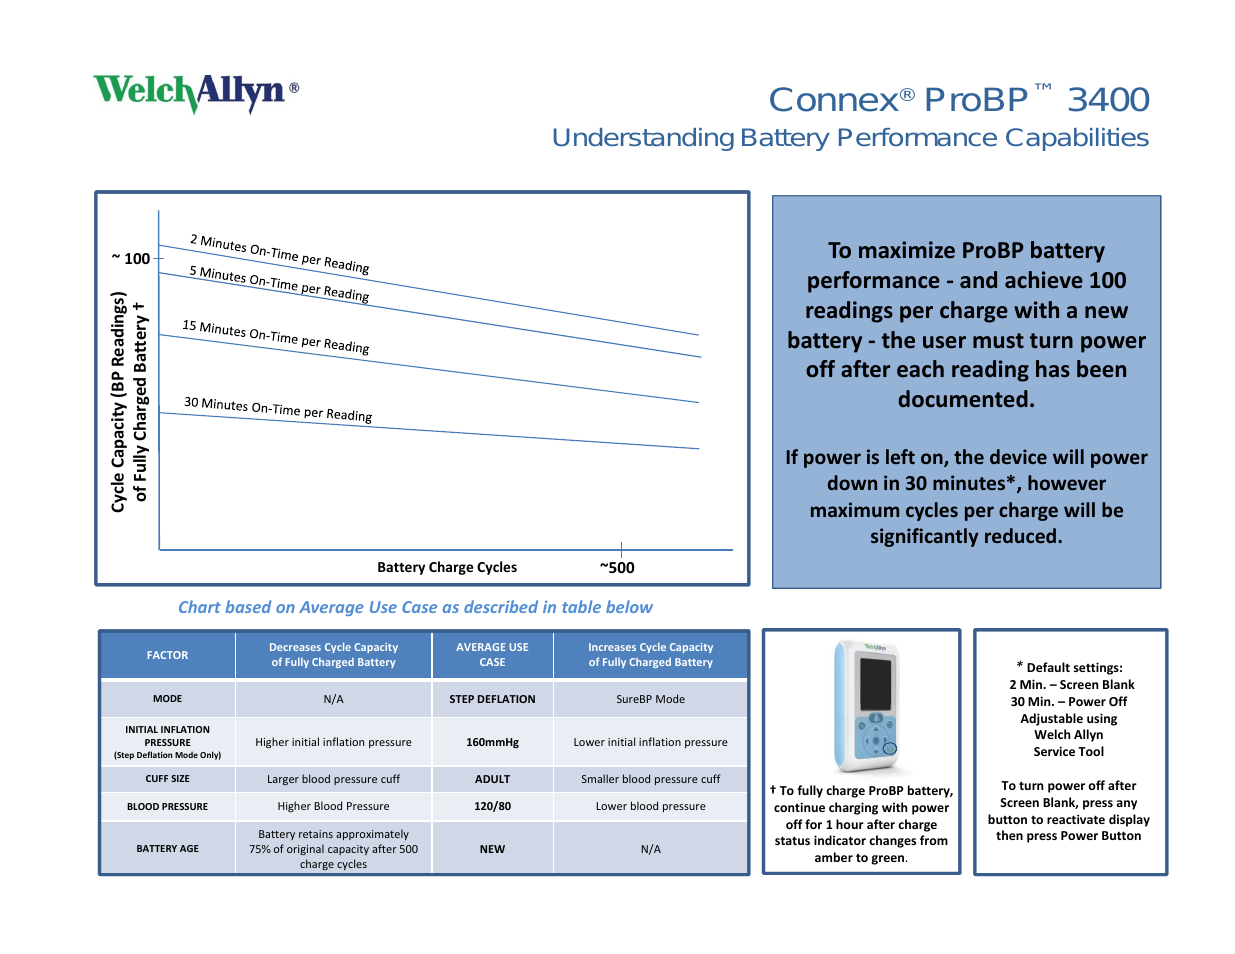 Connex ProBP 3400, Understanding Battery Performance Capabilities - Quick Reference Guide